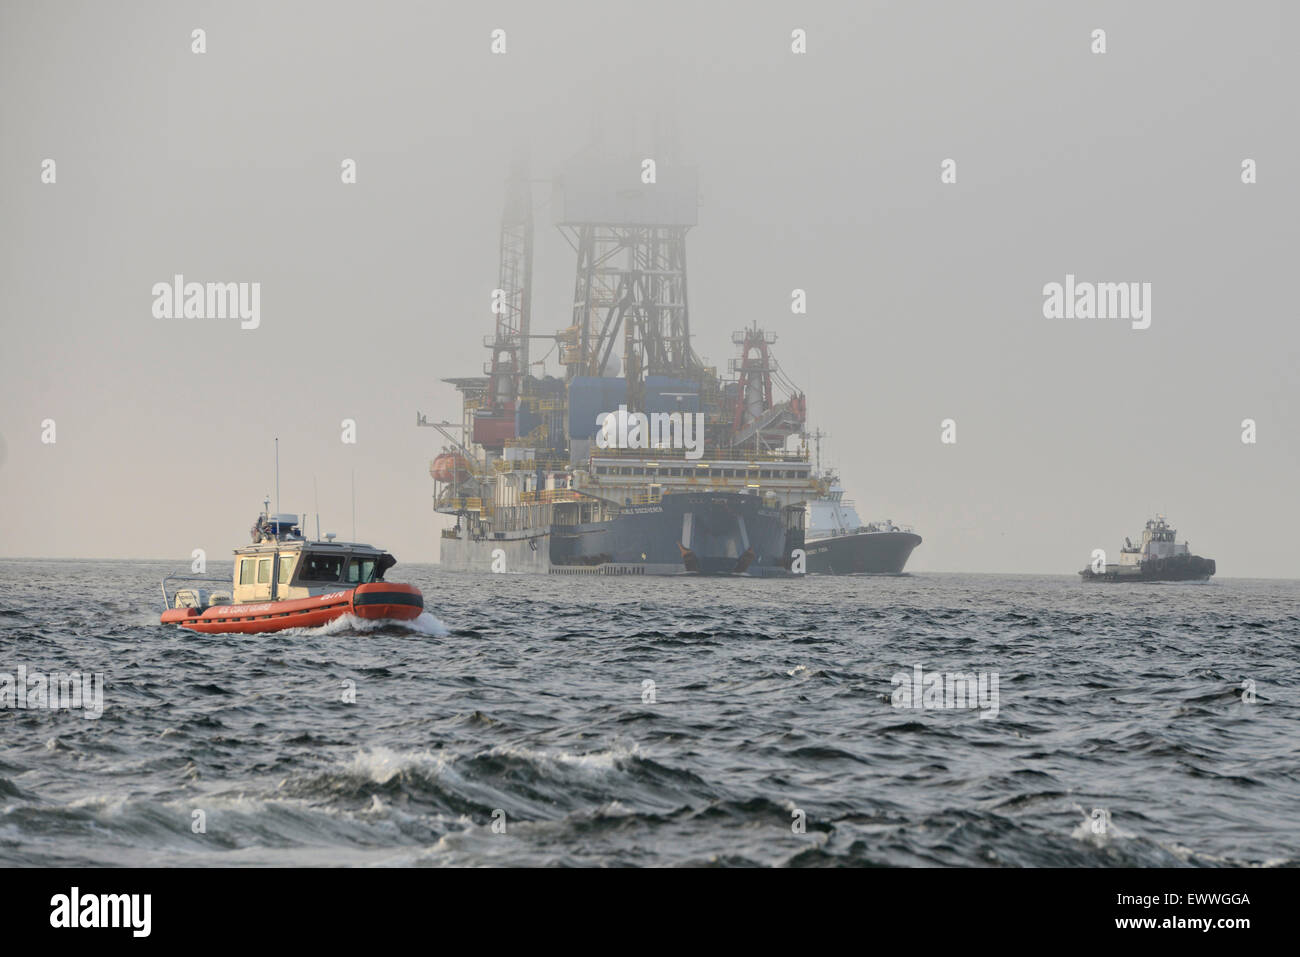 Coast Guard boats escort the deep arctic oil exploration ship Noble Discover as it transits the Puget Sound after departing June 30, 2015 from the Port of Everett, Washington. The Coast Guard enforced a 500-yard safety zone around the vessel as activists continued to try and block the ship. Stock Photo